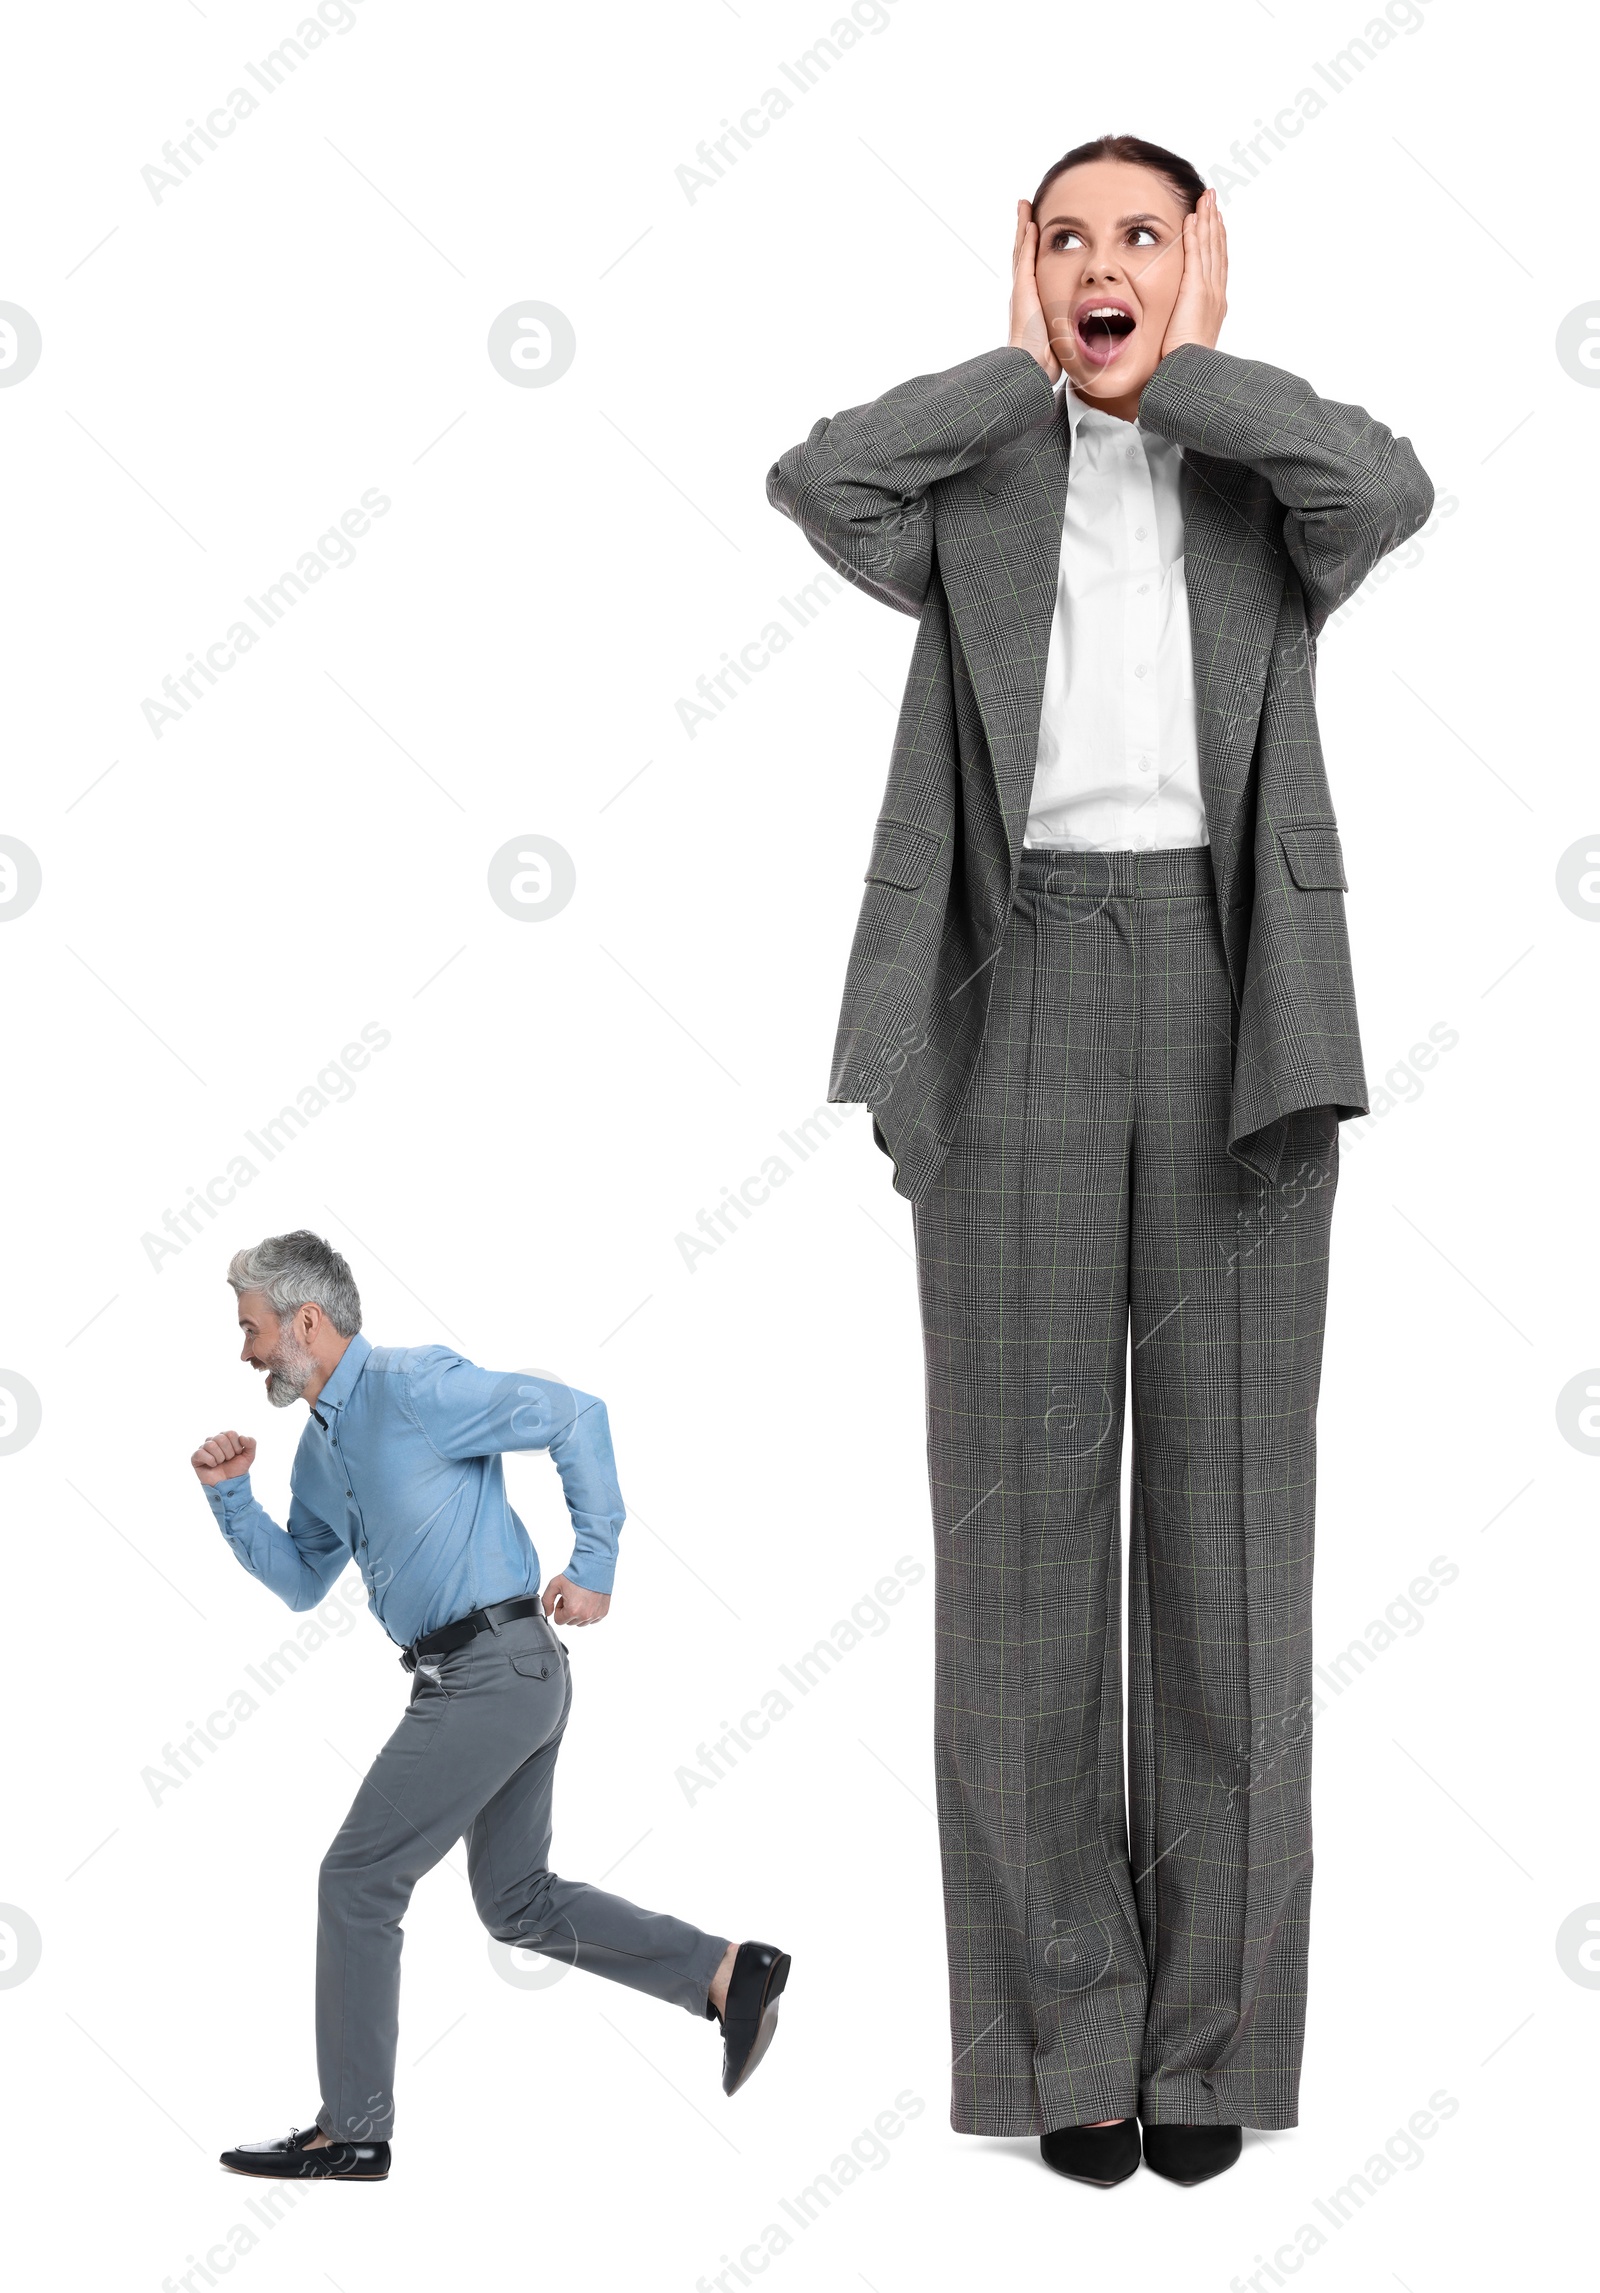 Image of Small man running from shocked giant woman on white background